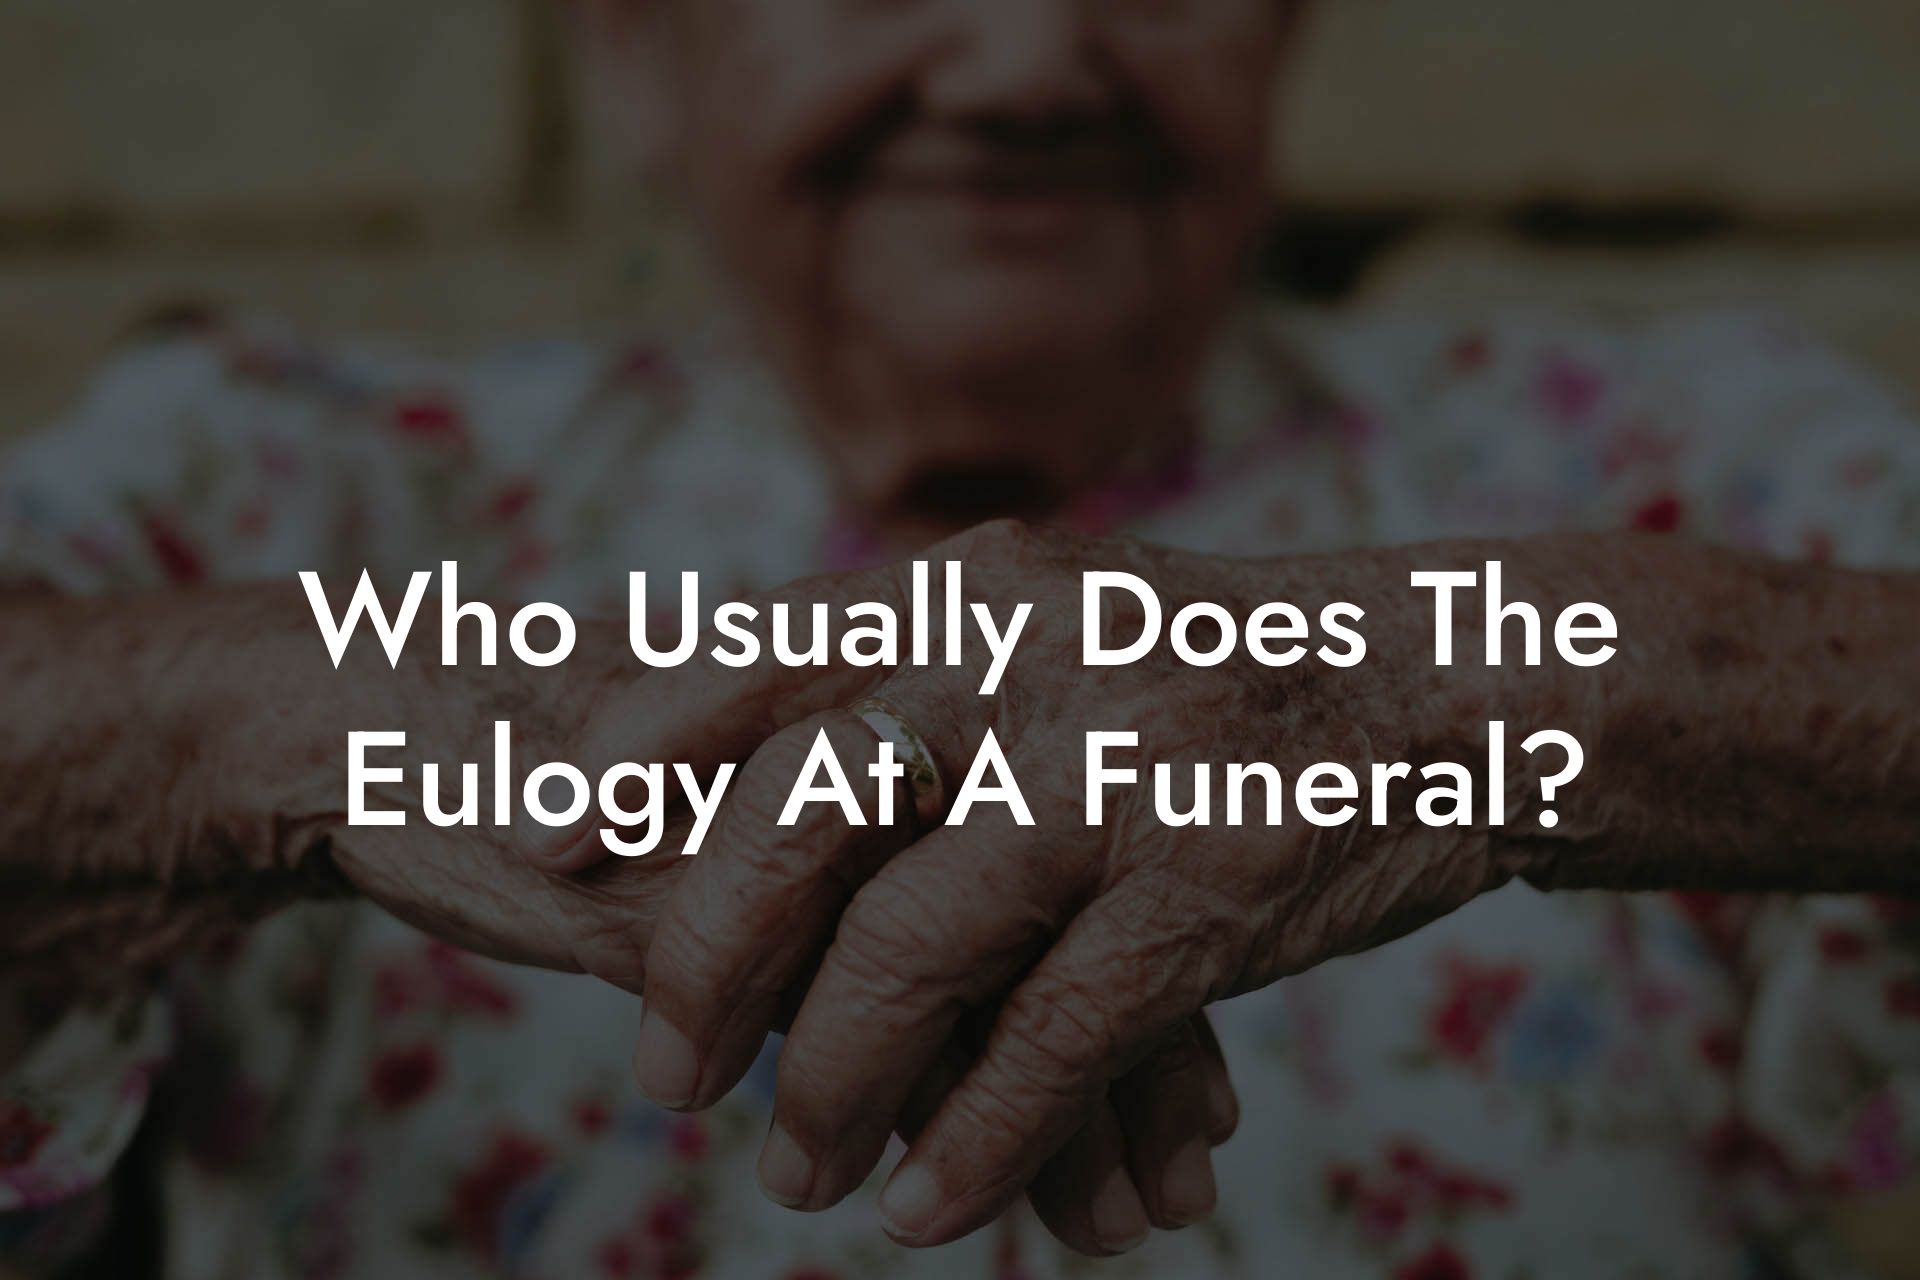 Who Usually Does The Eulogy At A Funeral?